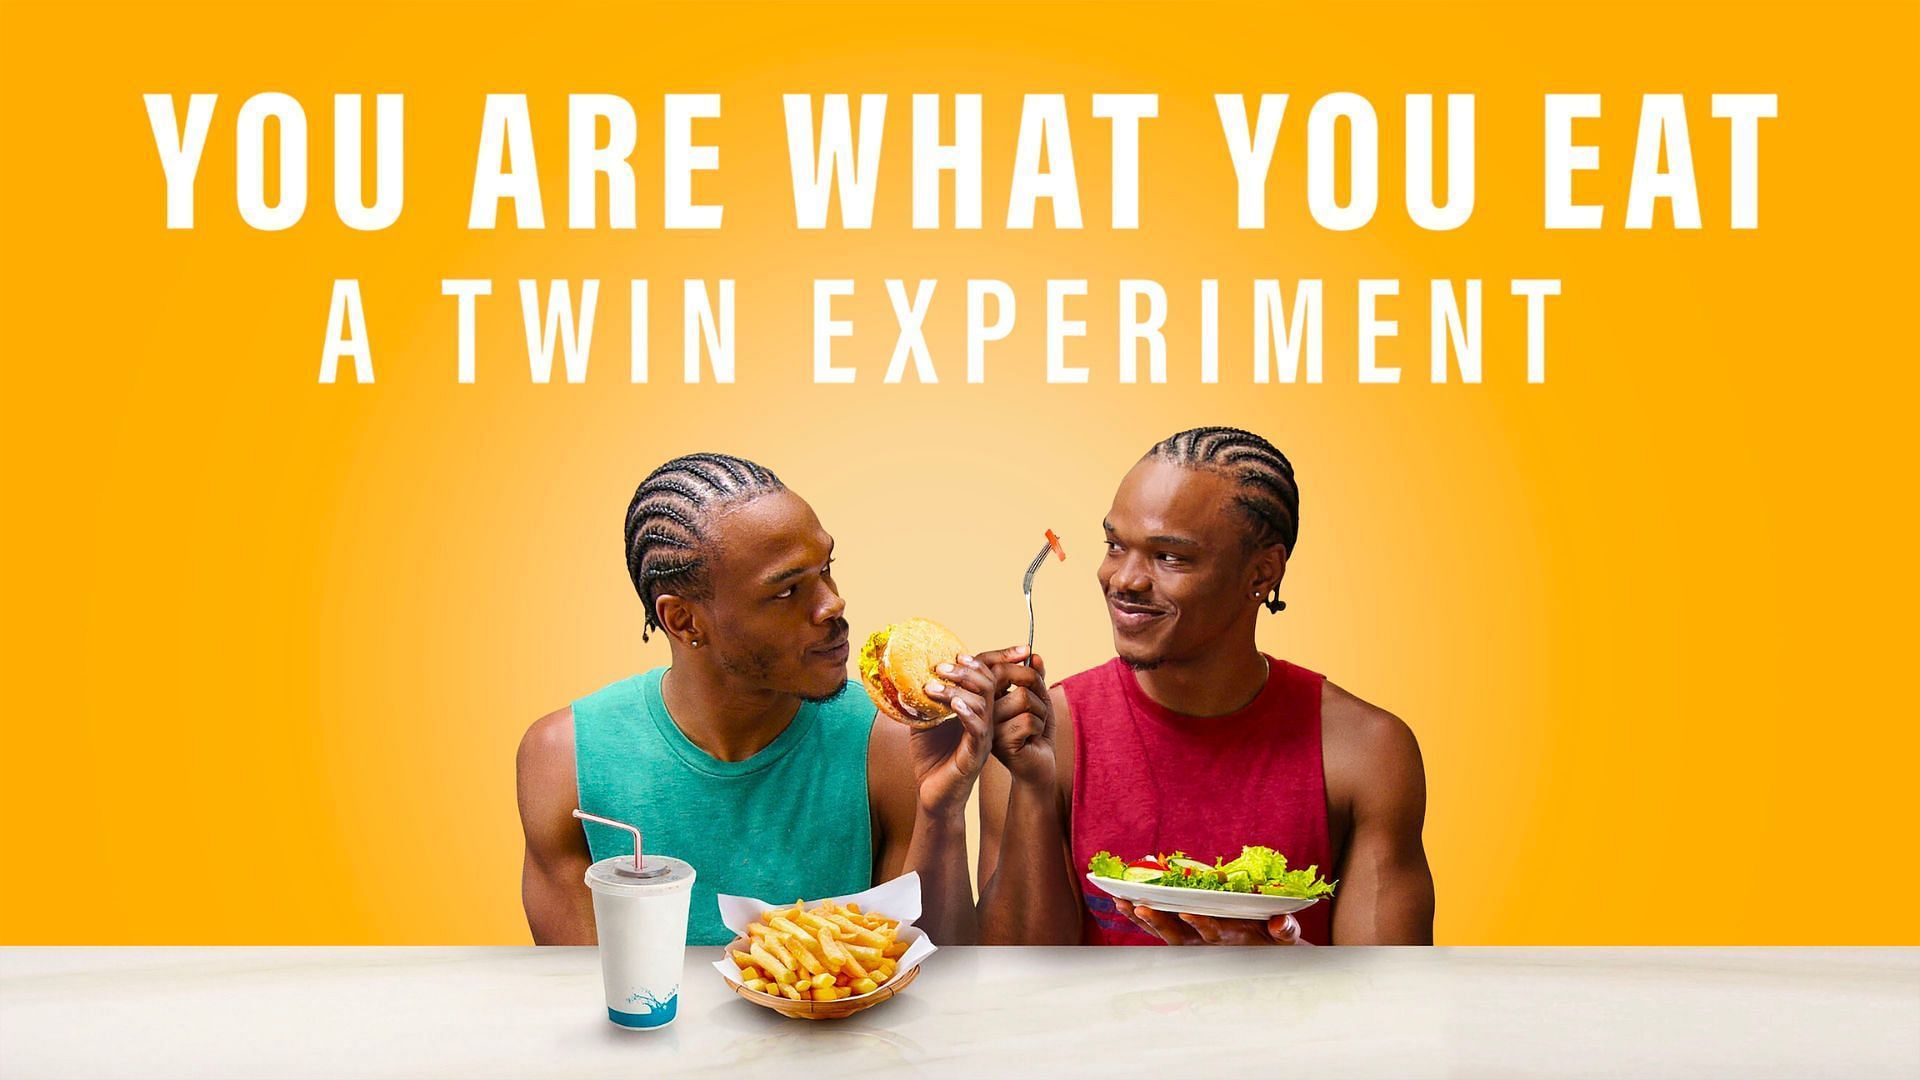 You Are What You Eat documentary on Netflix explores diets and their impacts on twins (Image via Roten Tomatoes)